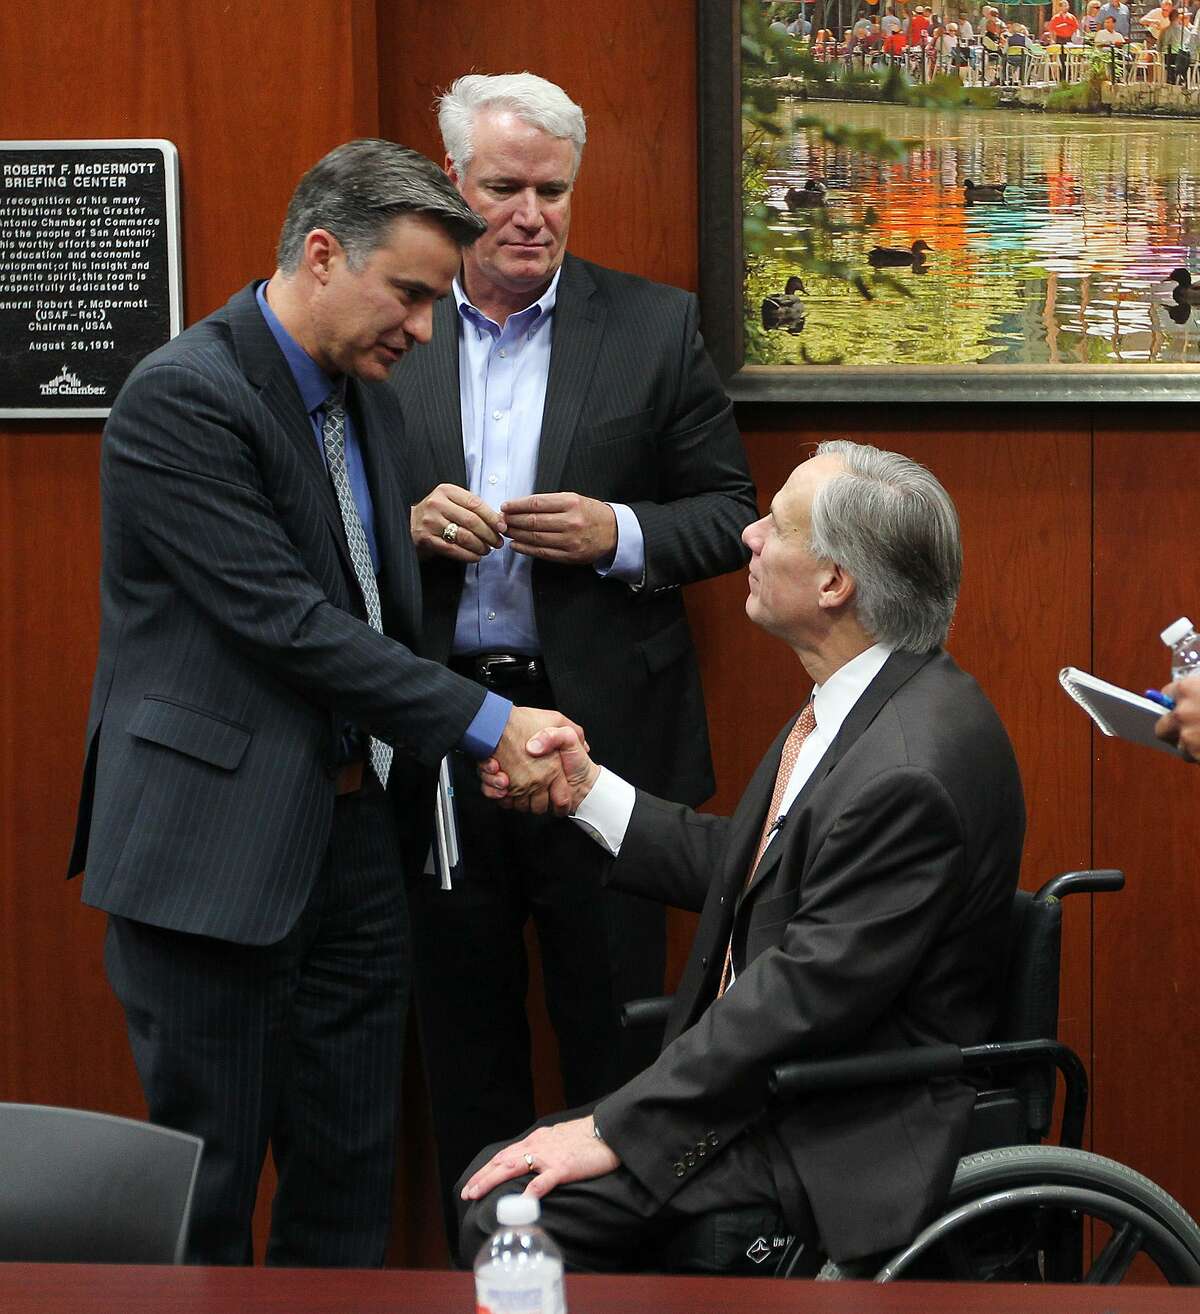 Governor-elect Greg Abbott, right, shakes hands with State Rep. Roland Gutierrez, D-San Antonio, after meeting with area state lawmakers for a legislative roundtable discussion at the San Antonio Chamber of Commerce, Monday, Dec. 15, 2014. Behind them is Rep. Lyle Larson, R-San Antonio. Also at the meeting were San Antonio Democratic representatives Trey Martinez Fischer and Justin Rodriguez.